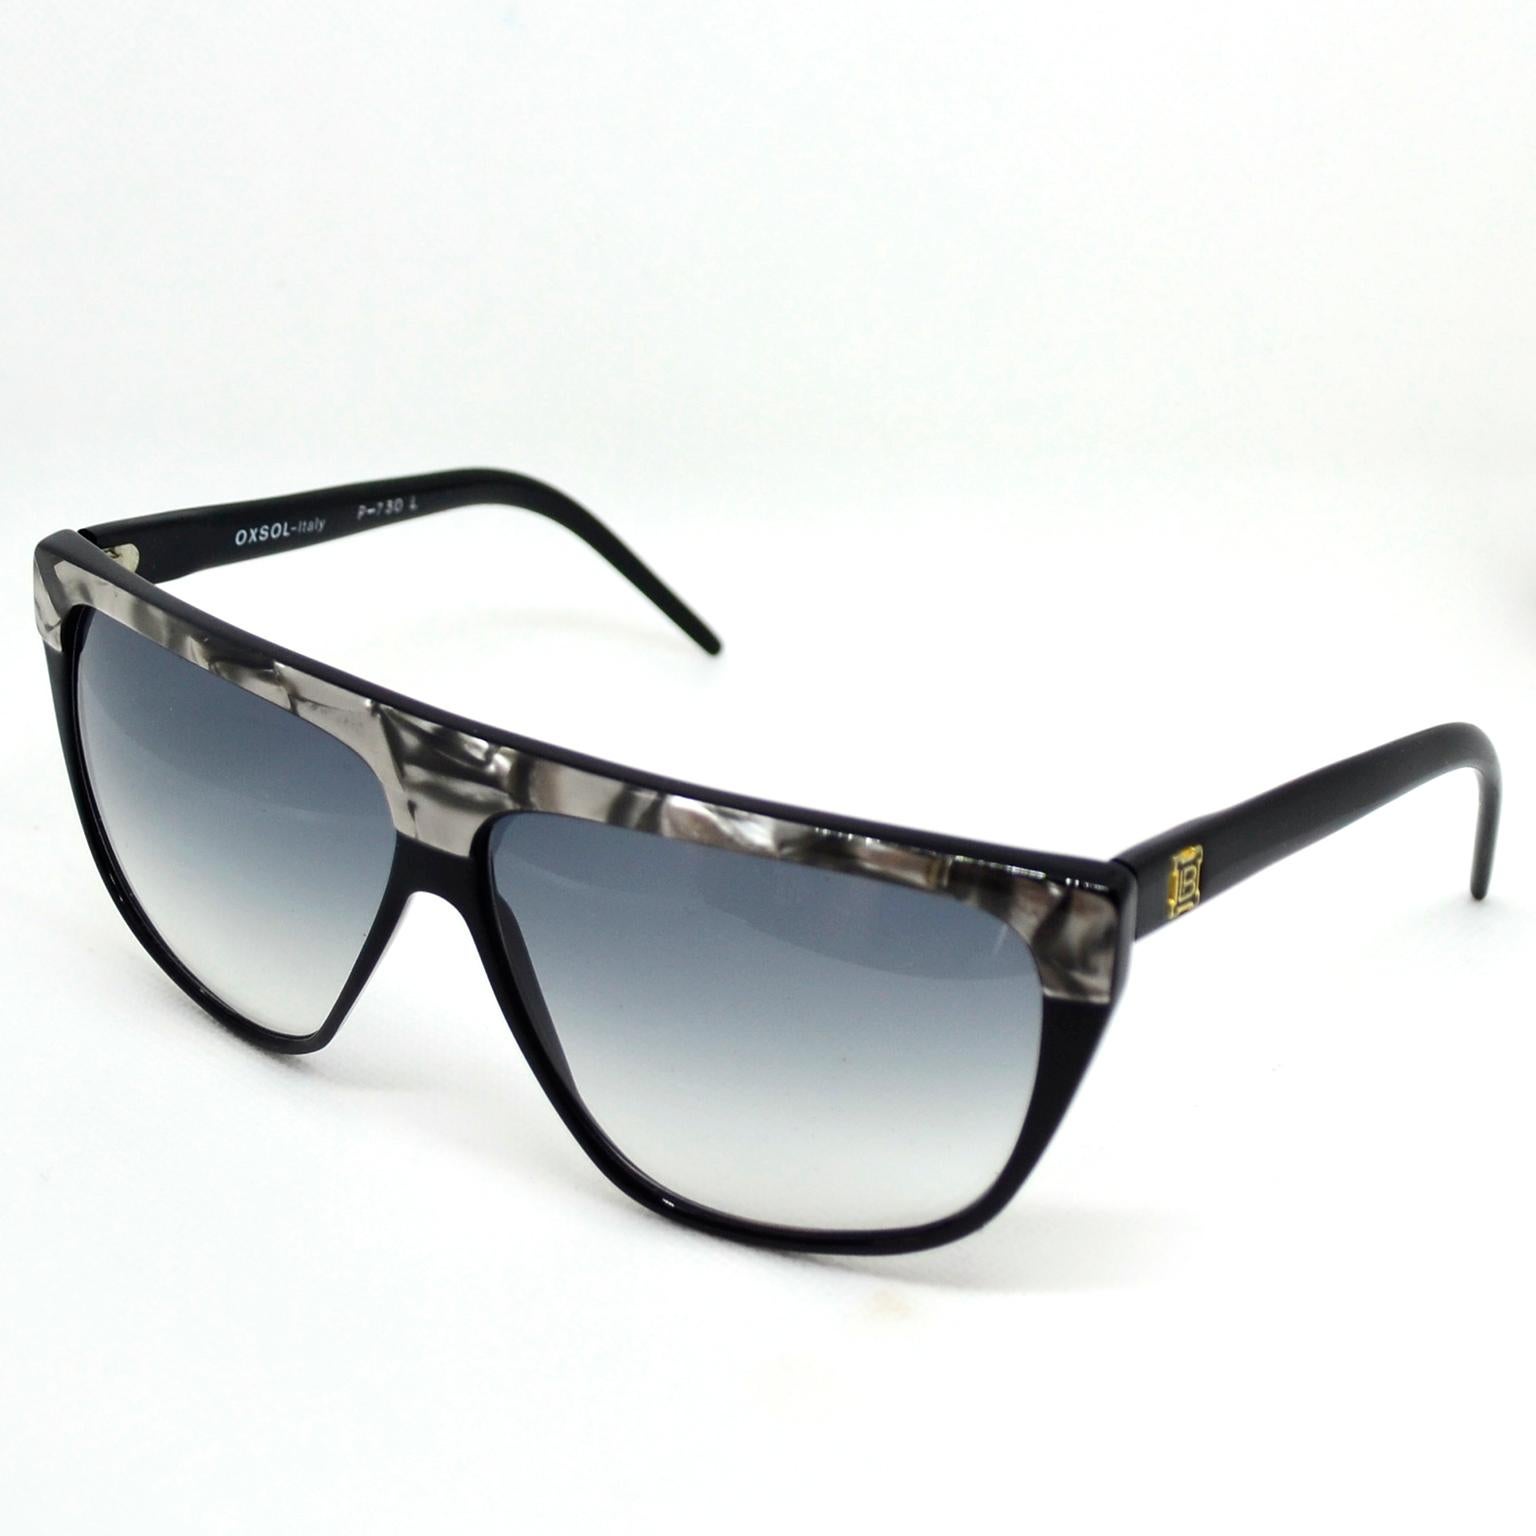 Laura Biagiotti Black and Silver Marbled Vintage Sunglasses For Sale 1